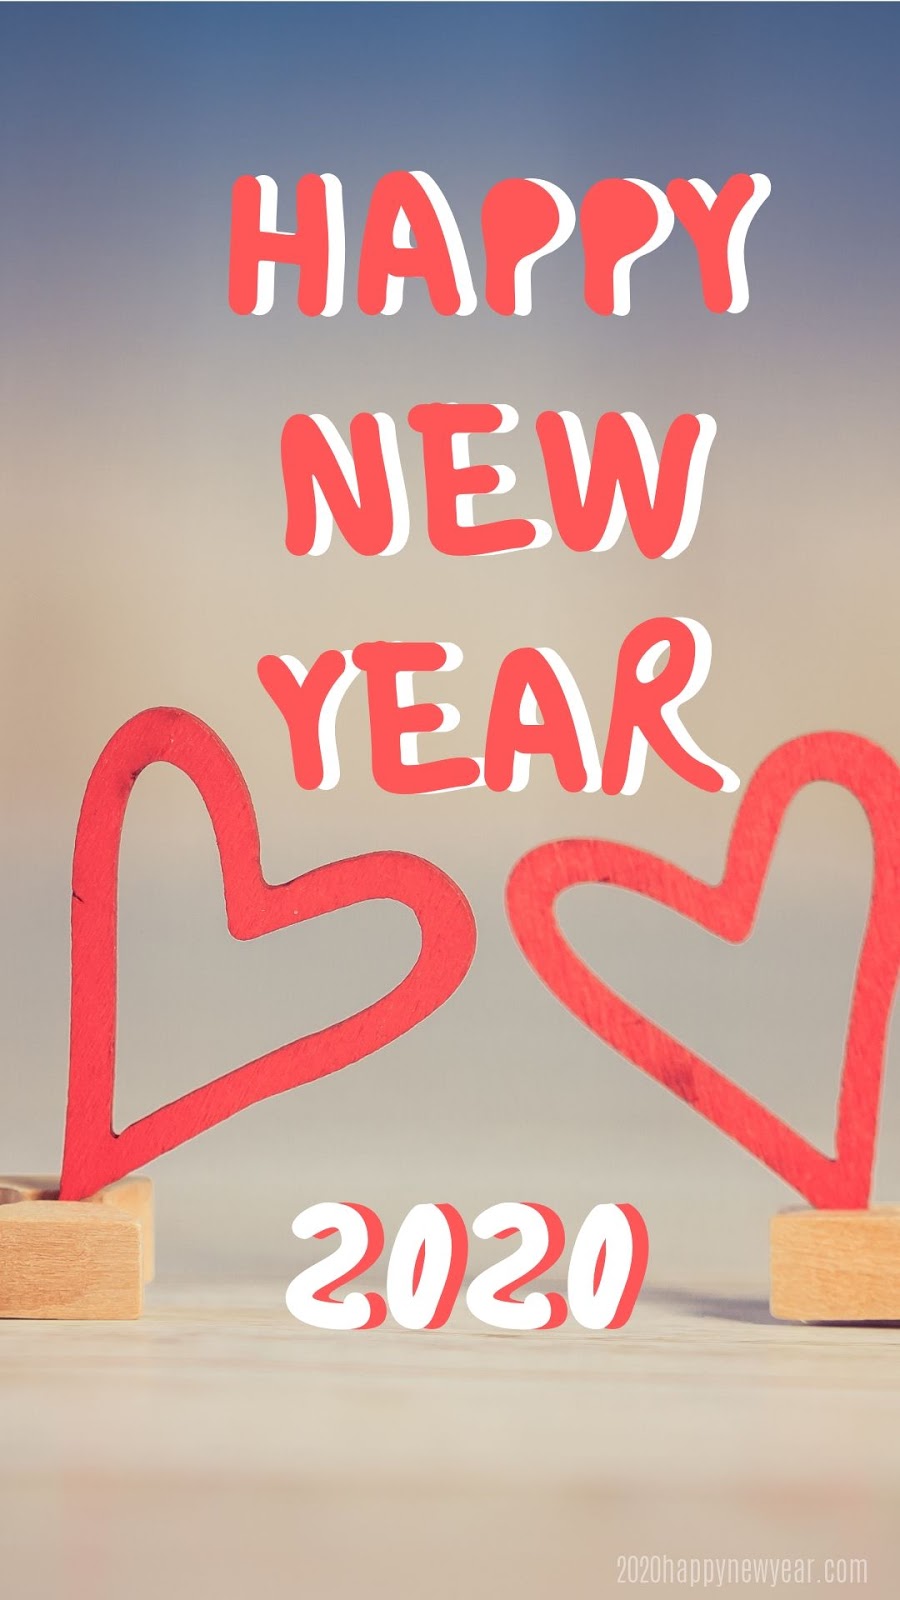 Happy New Year 2020 WhatsApp Status Images for Free